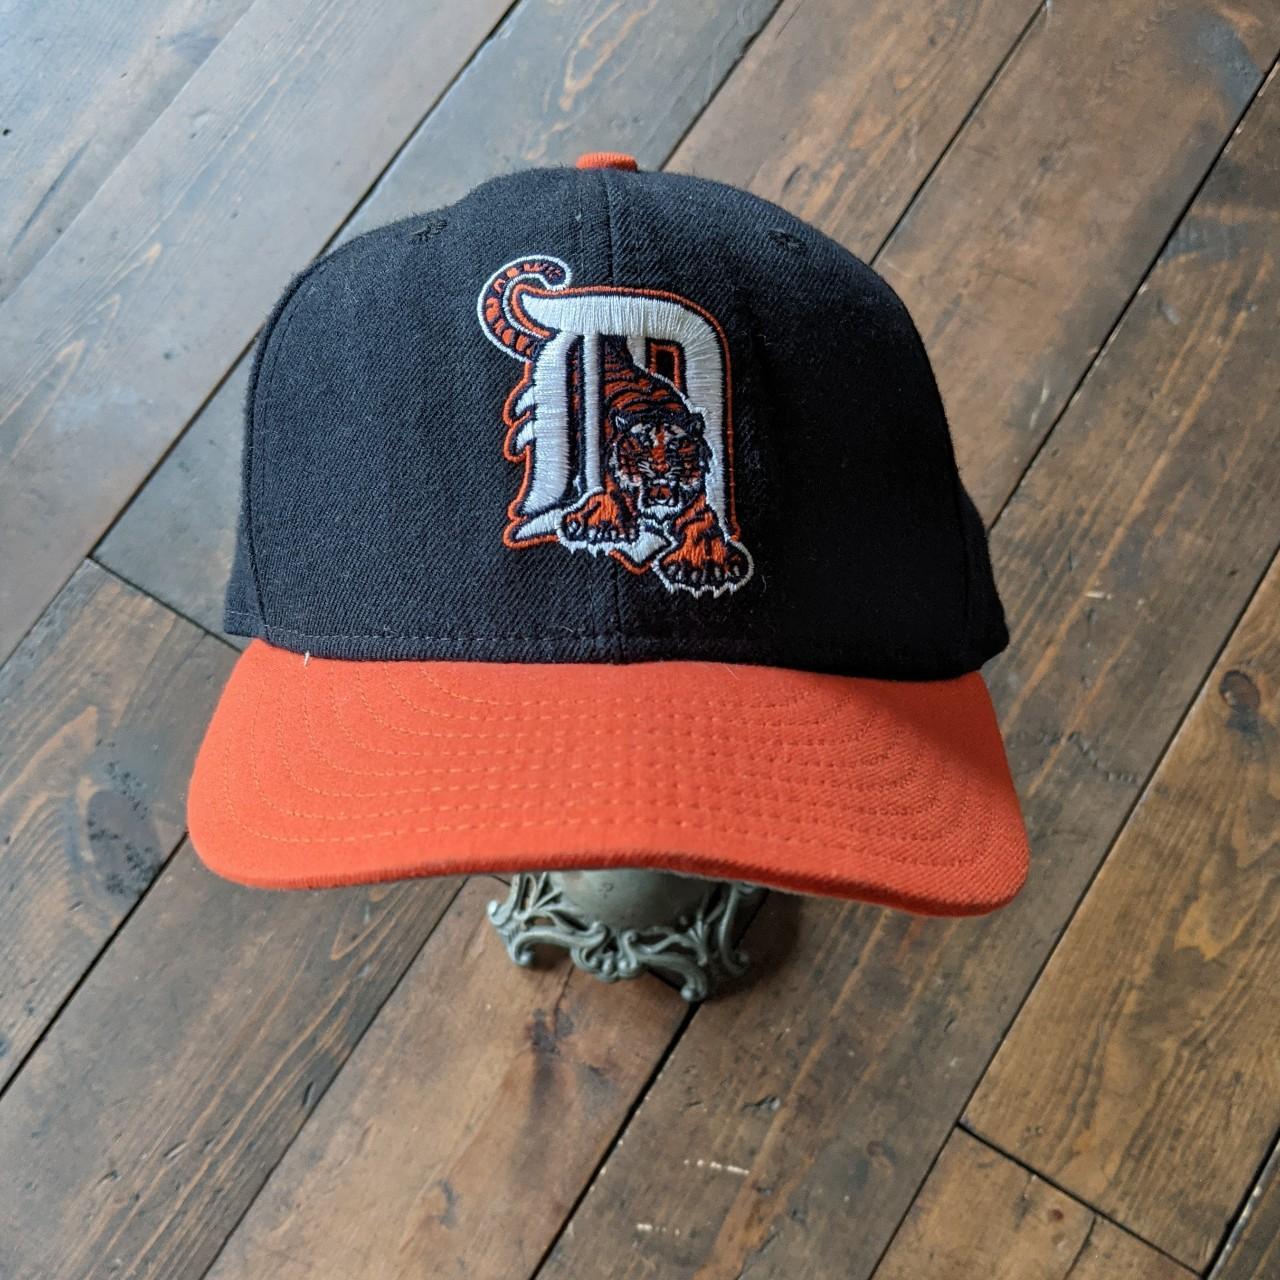 Vintage 1990s Detroit Tigers New Era MLB Baseball Fitted New 